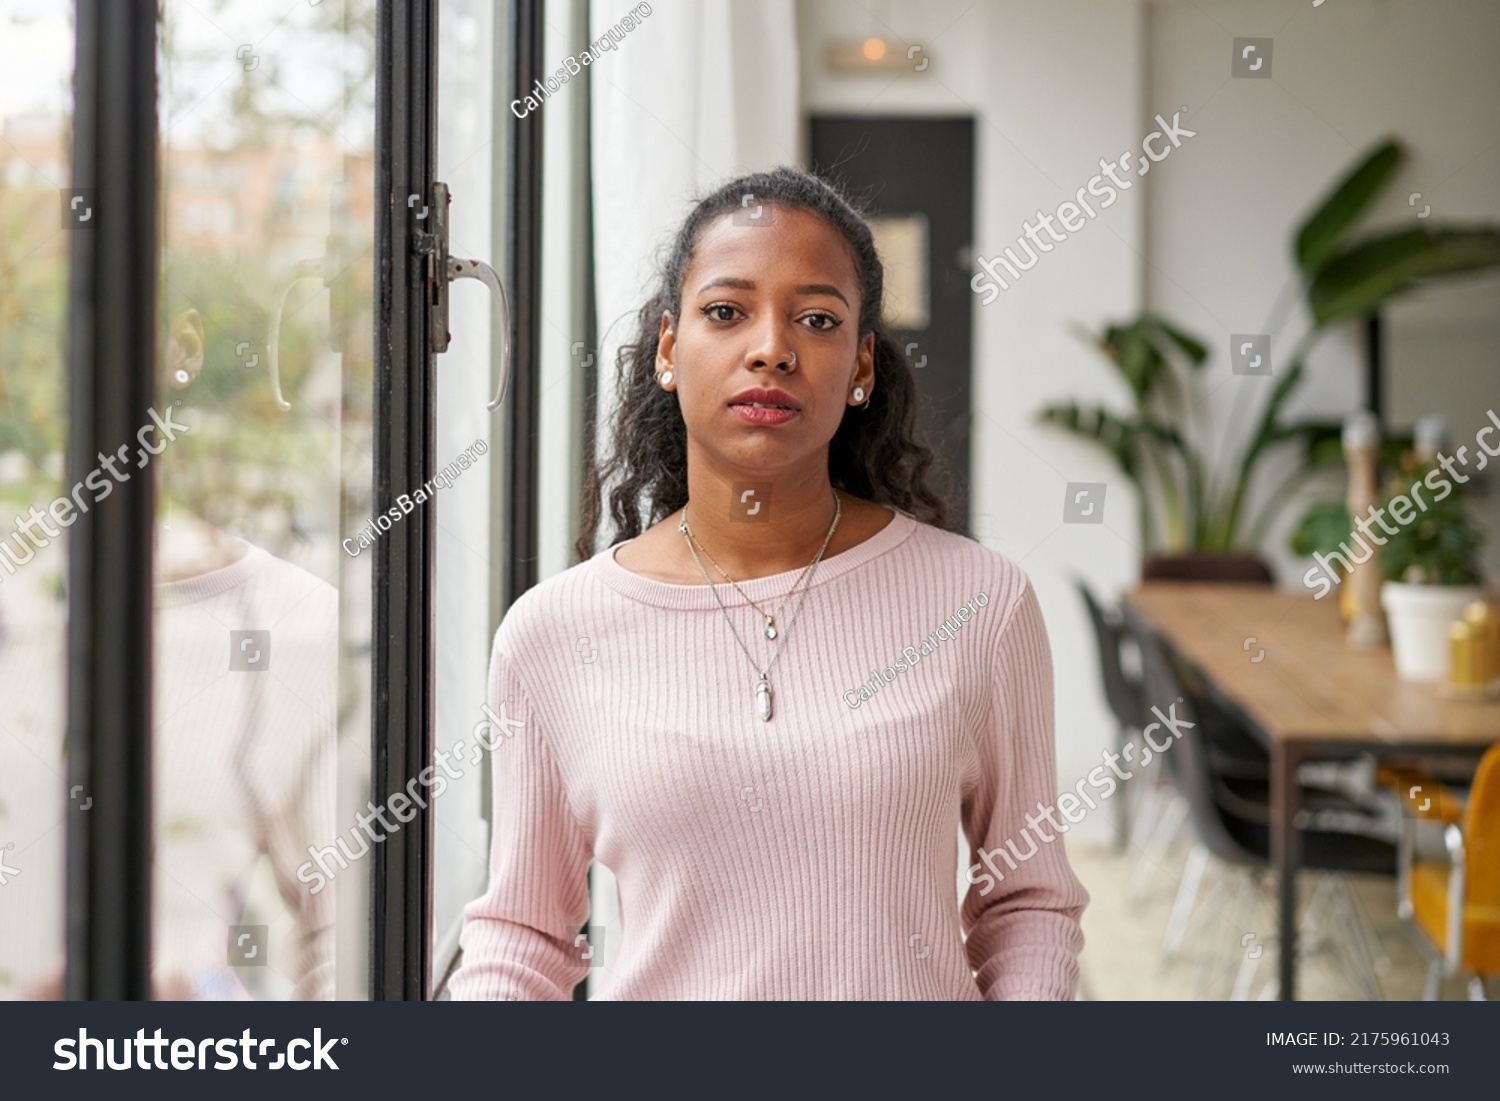 Confident beautiful African woman professional with serious face standing at home in office looking at camera. Confident entrepreneur lady posing alone, head shot close up view portrait #2175961043